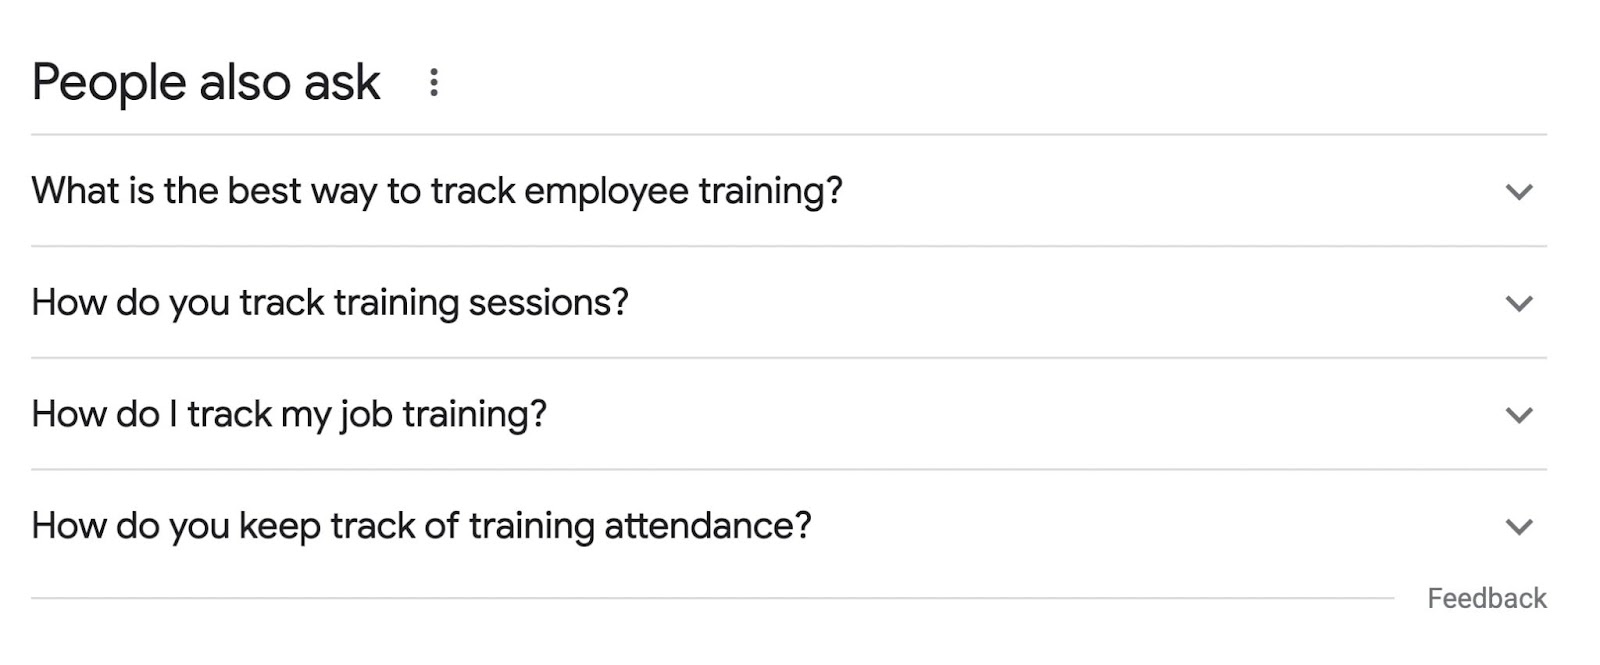 "People also ask" section for “how to track employee training" query